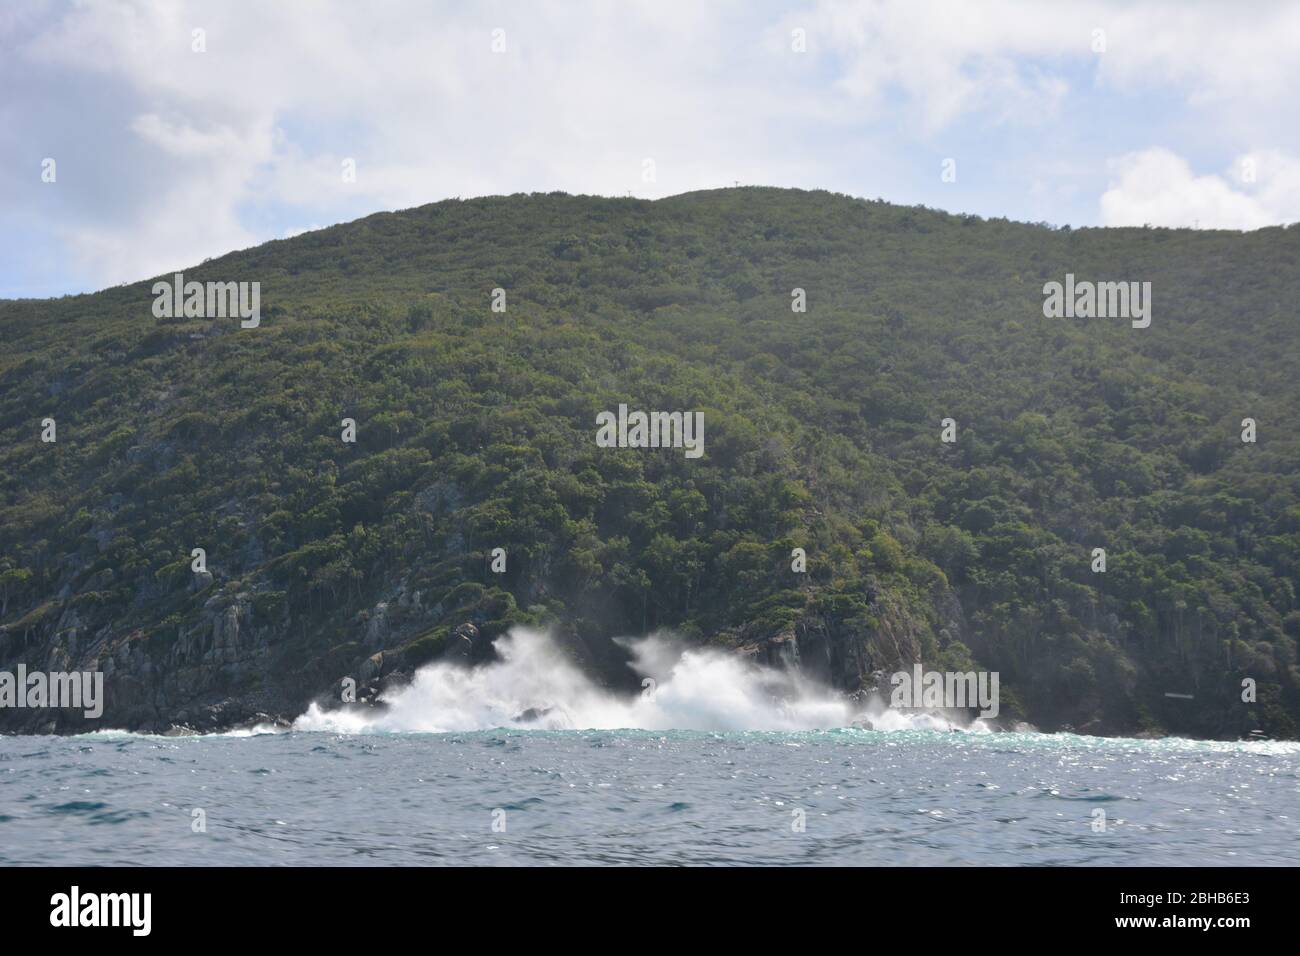 Waves crash against a thickly forested island in the British Virgin Islands, a British Overseas Territory in the Caribbean. Stock Photo